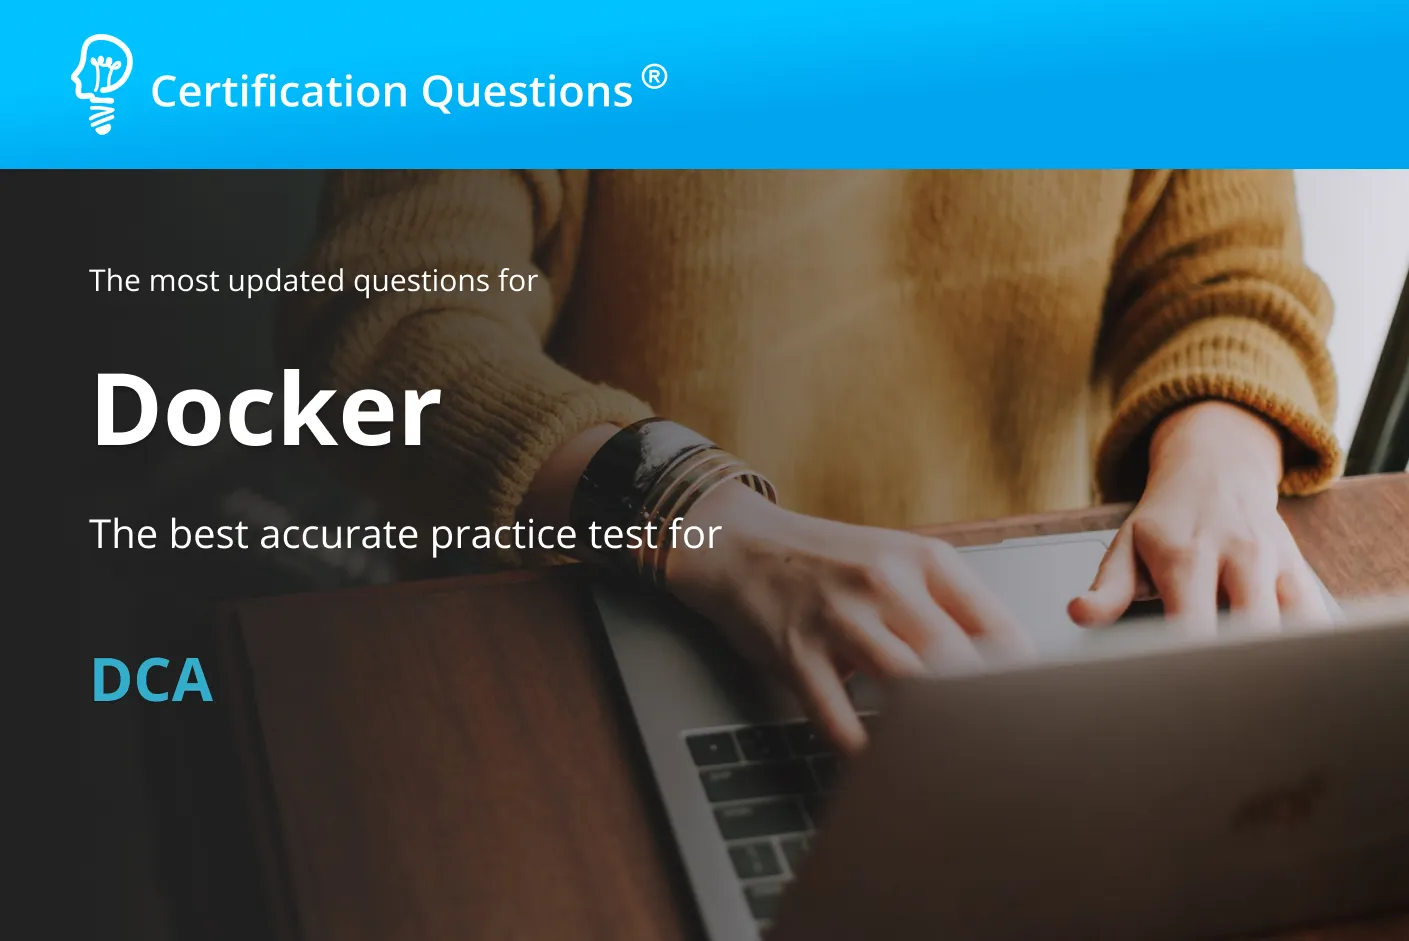 This image is related to docker certified associate practice test